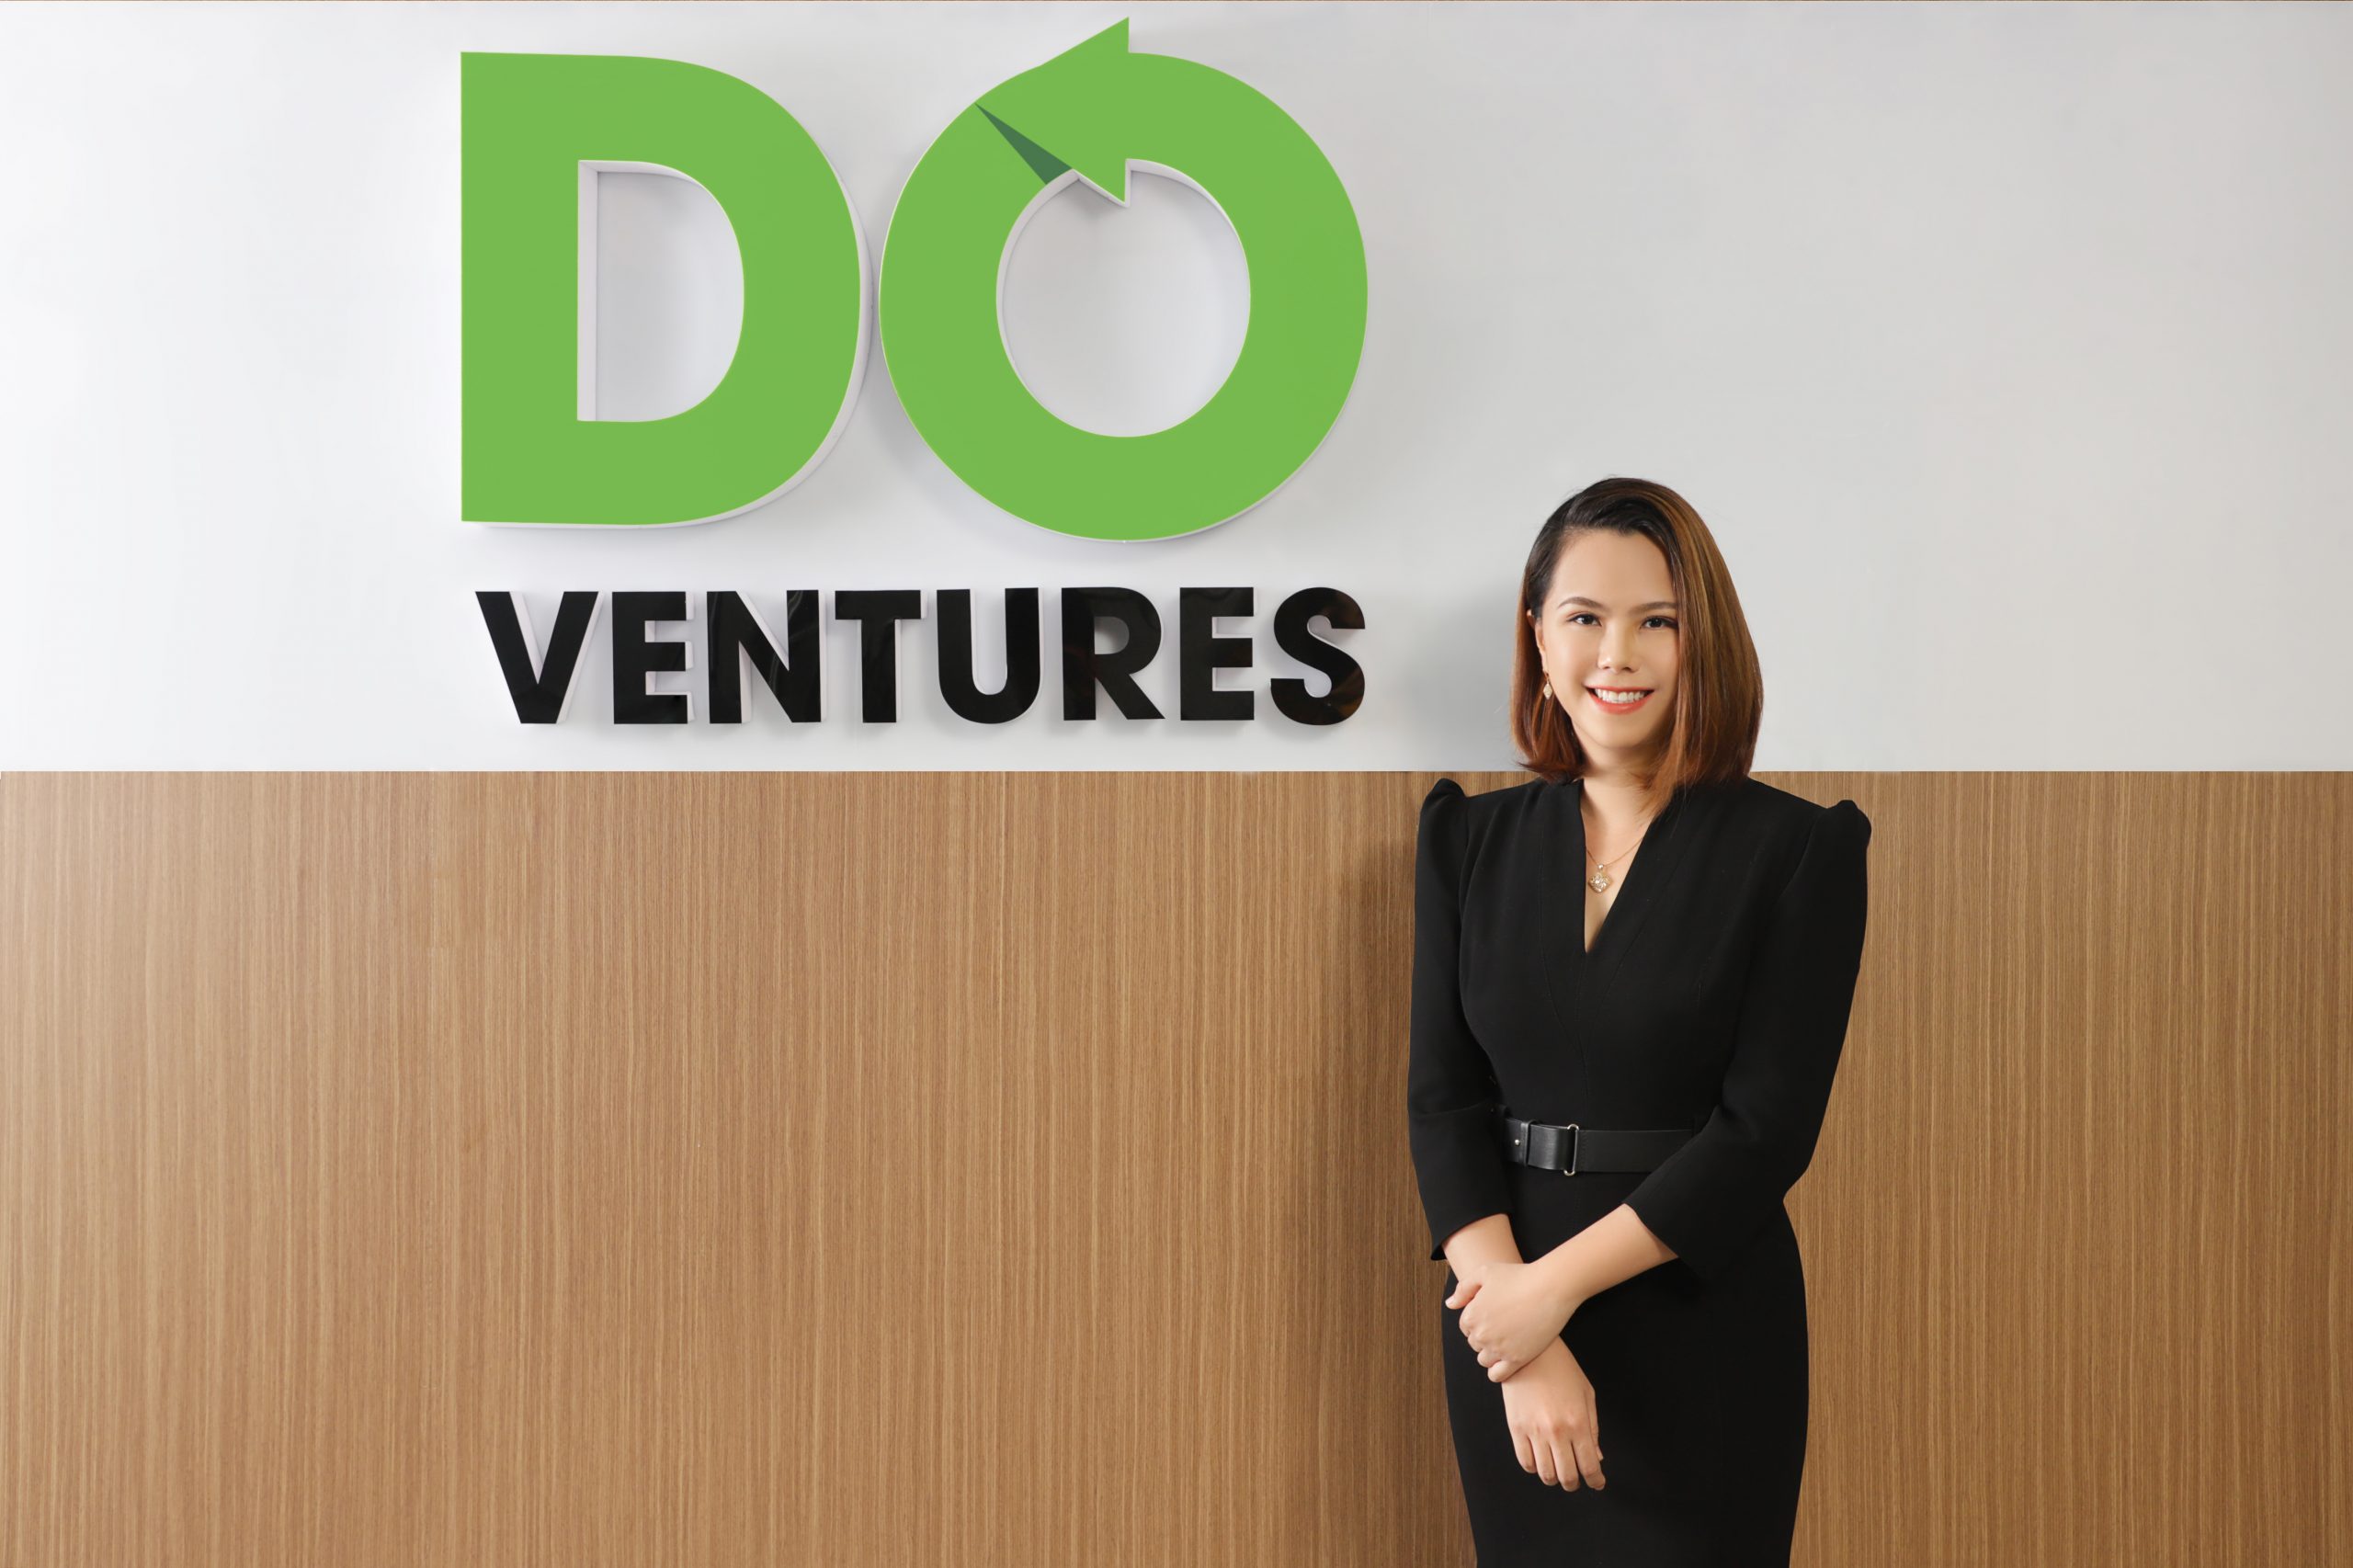 Amid financing drop in Southeast Asia, Vietnam to be top destination for investment in the next year: Q&A with Do Ventures co-founder Vy Le